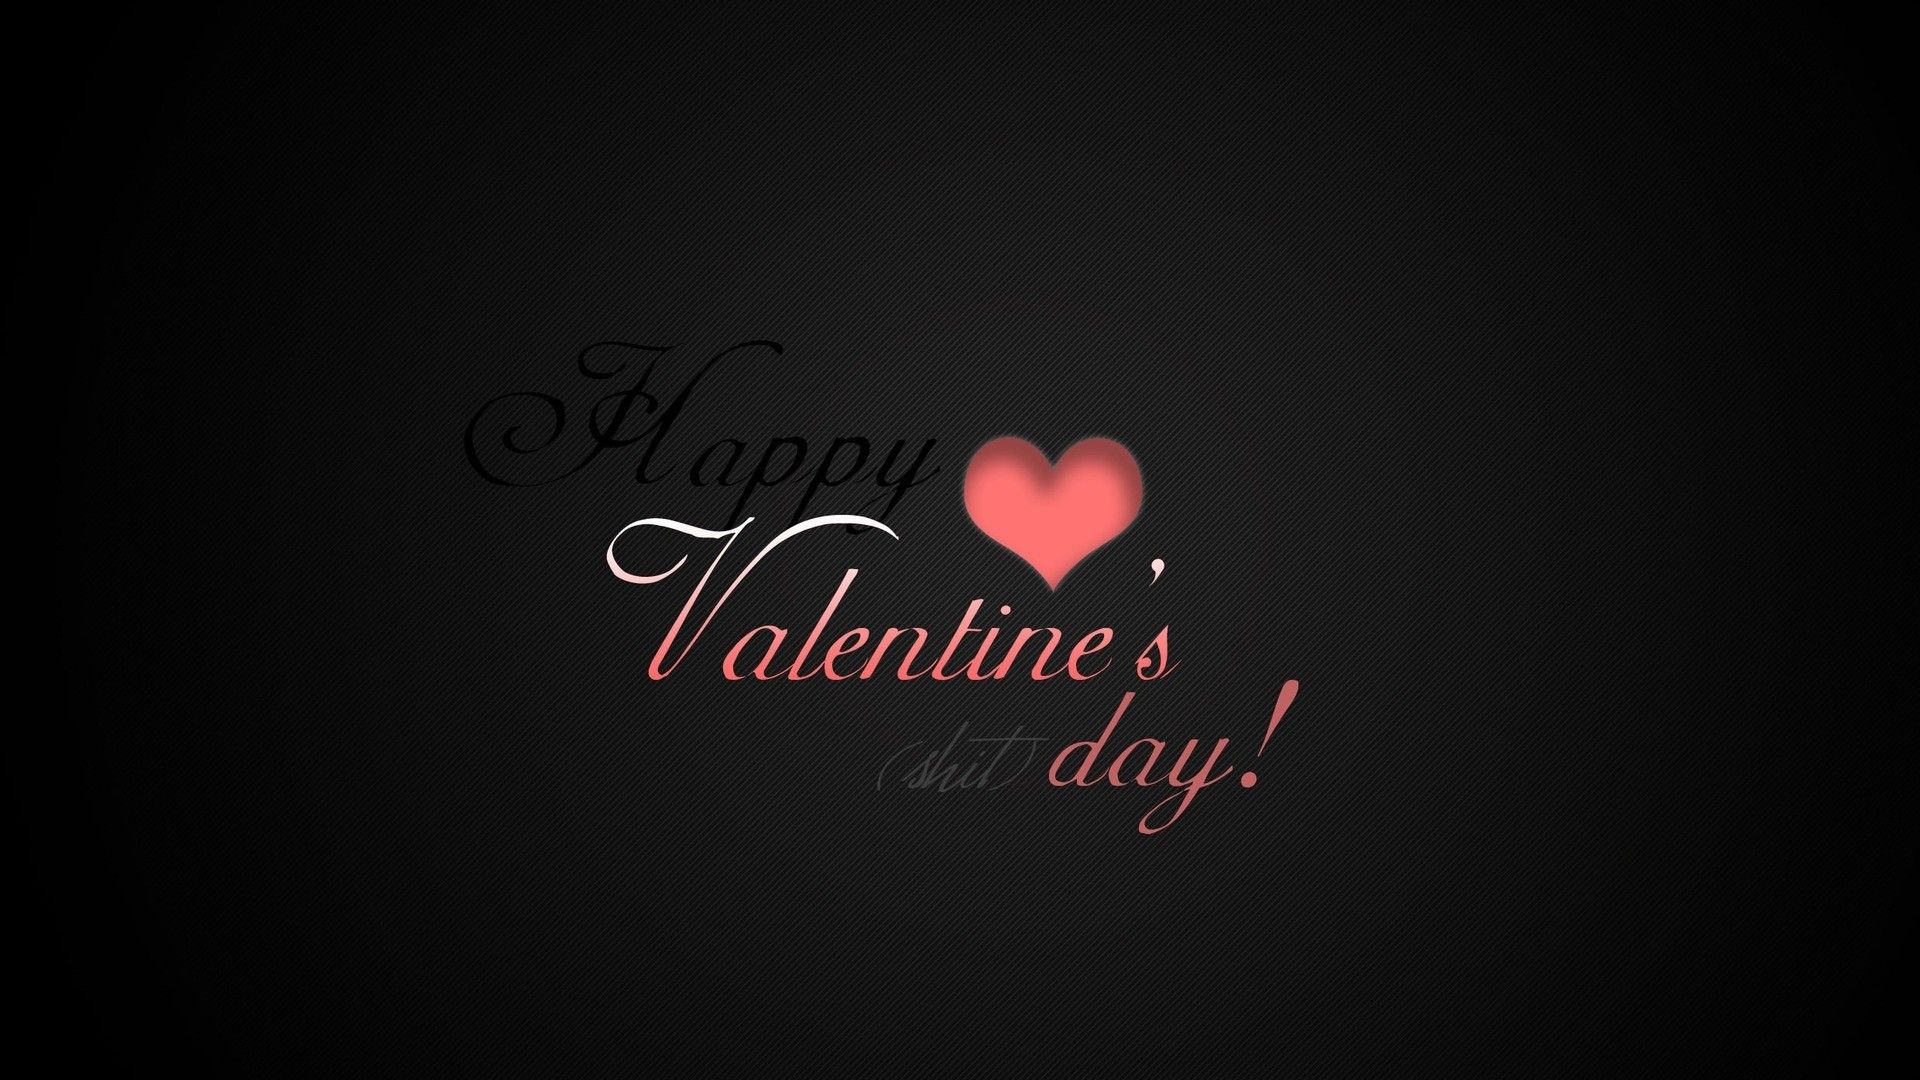 Quotes about Black valentines (26 quotes)